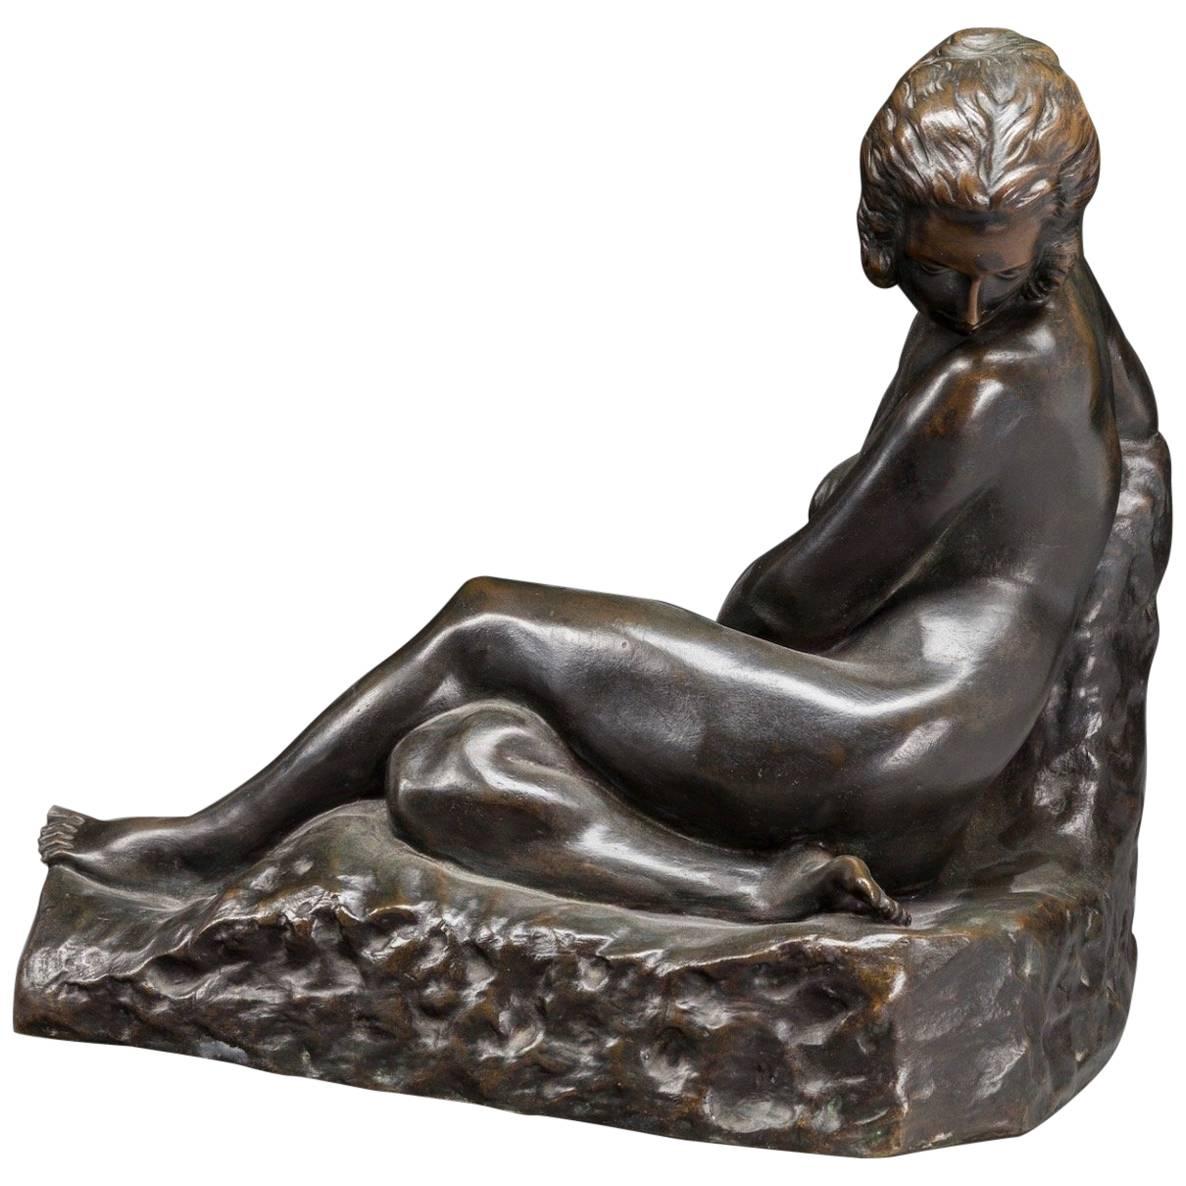 Antoine Bouraine bronze representing a reclining beautiful nude figure of a lady with her head turned away. Bronze with a rich dark brown to black patina. A very moving art piece that will place well in an Art Deco to art nouveau environment. A very